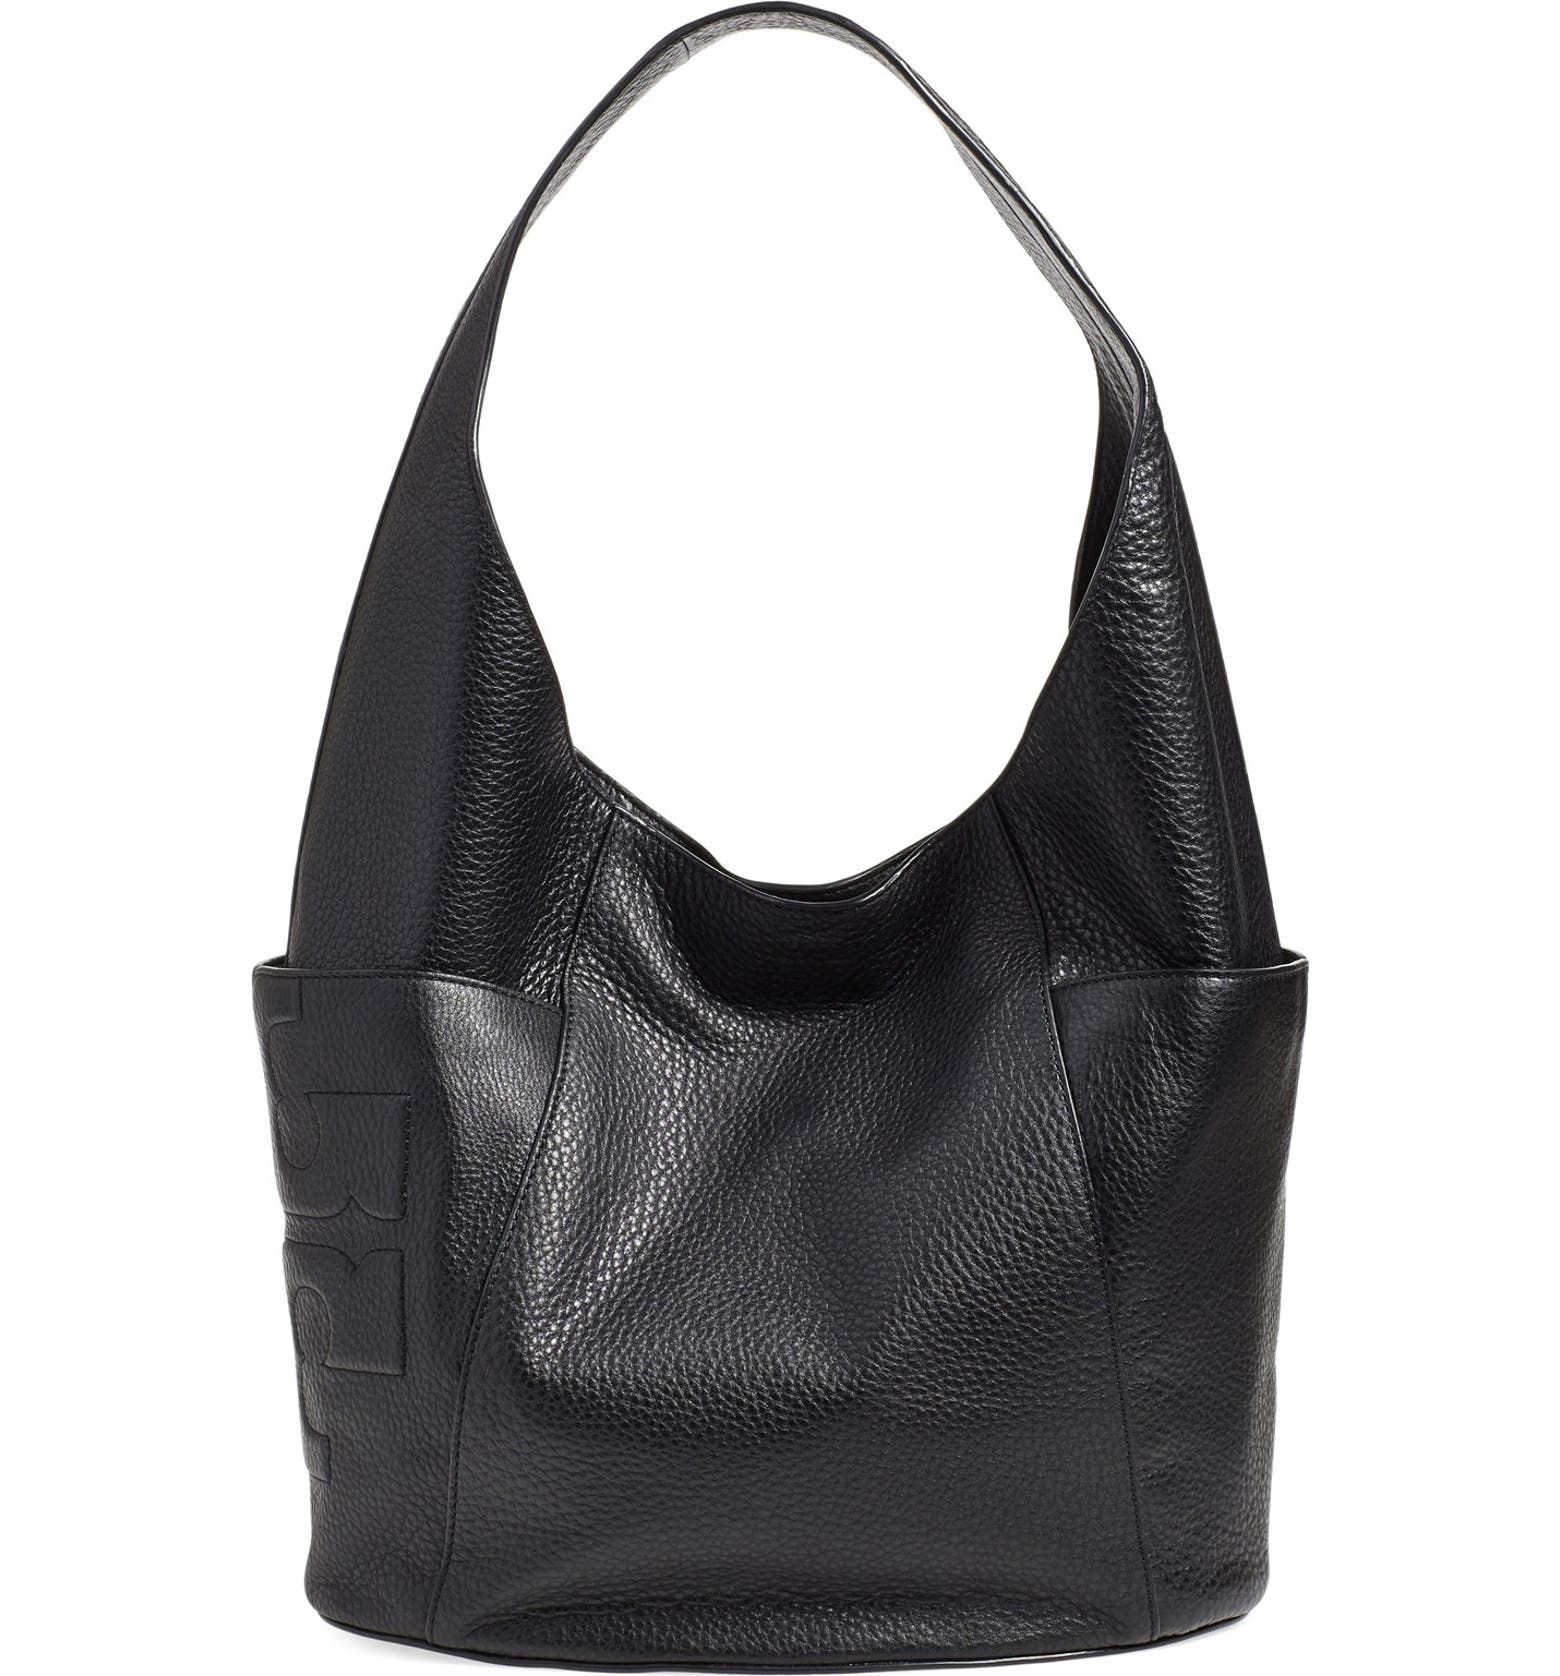 Tory Burch 'Bombe T' Leather Hobo | Nordstrom